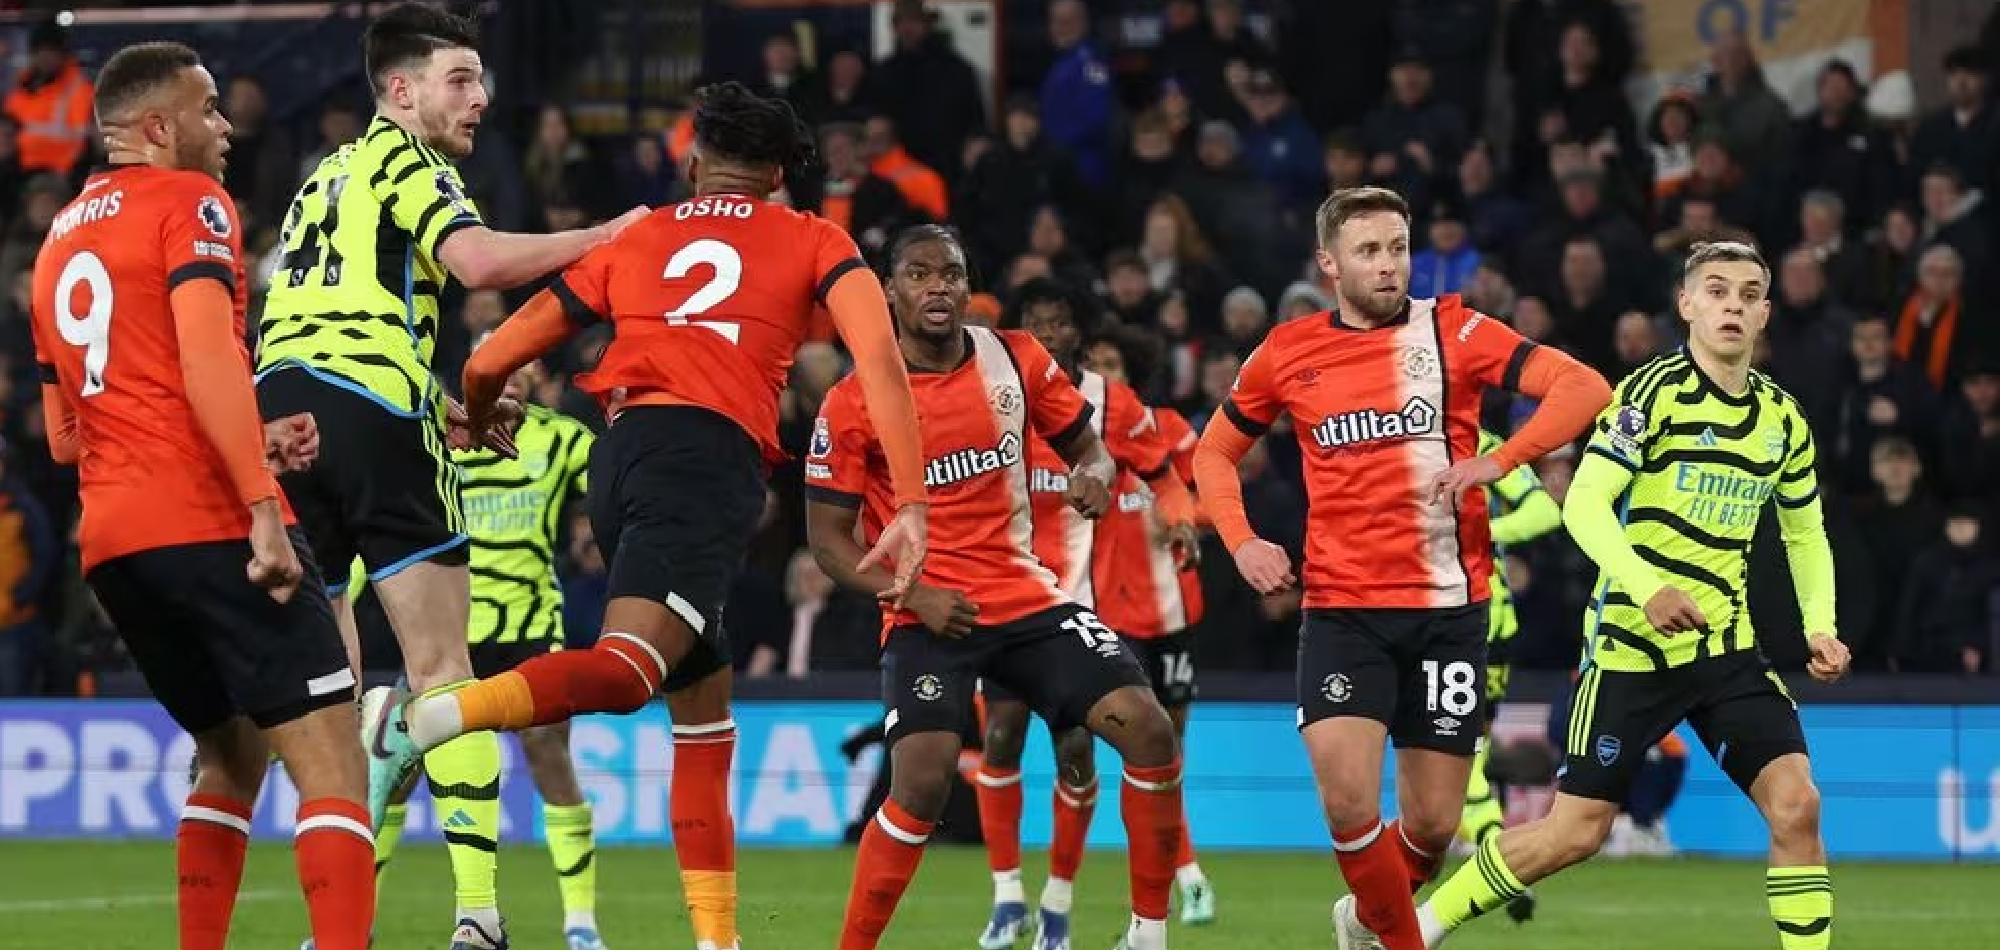 Arsenal go five clear as Rice seals seven-goal thriller at Luton